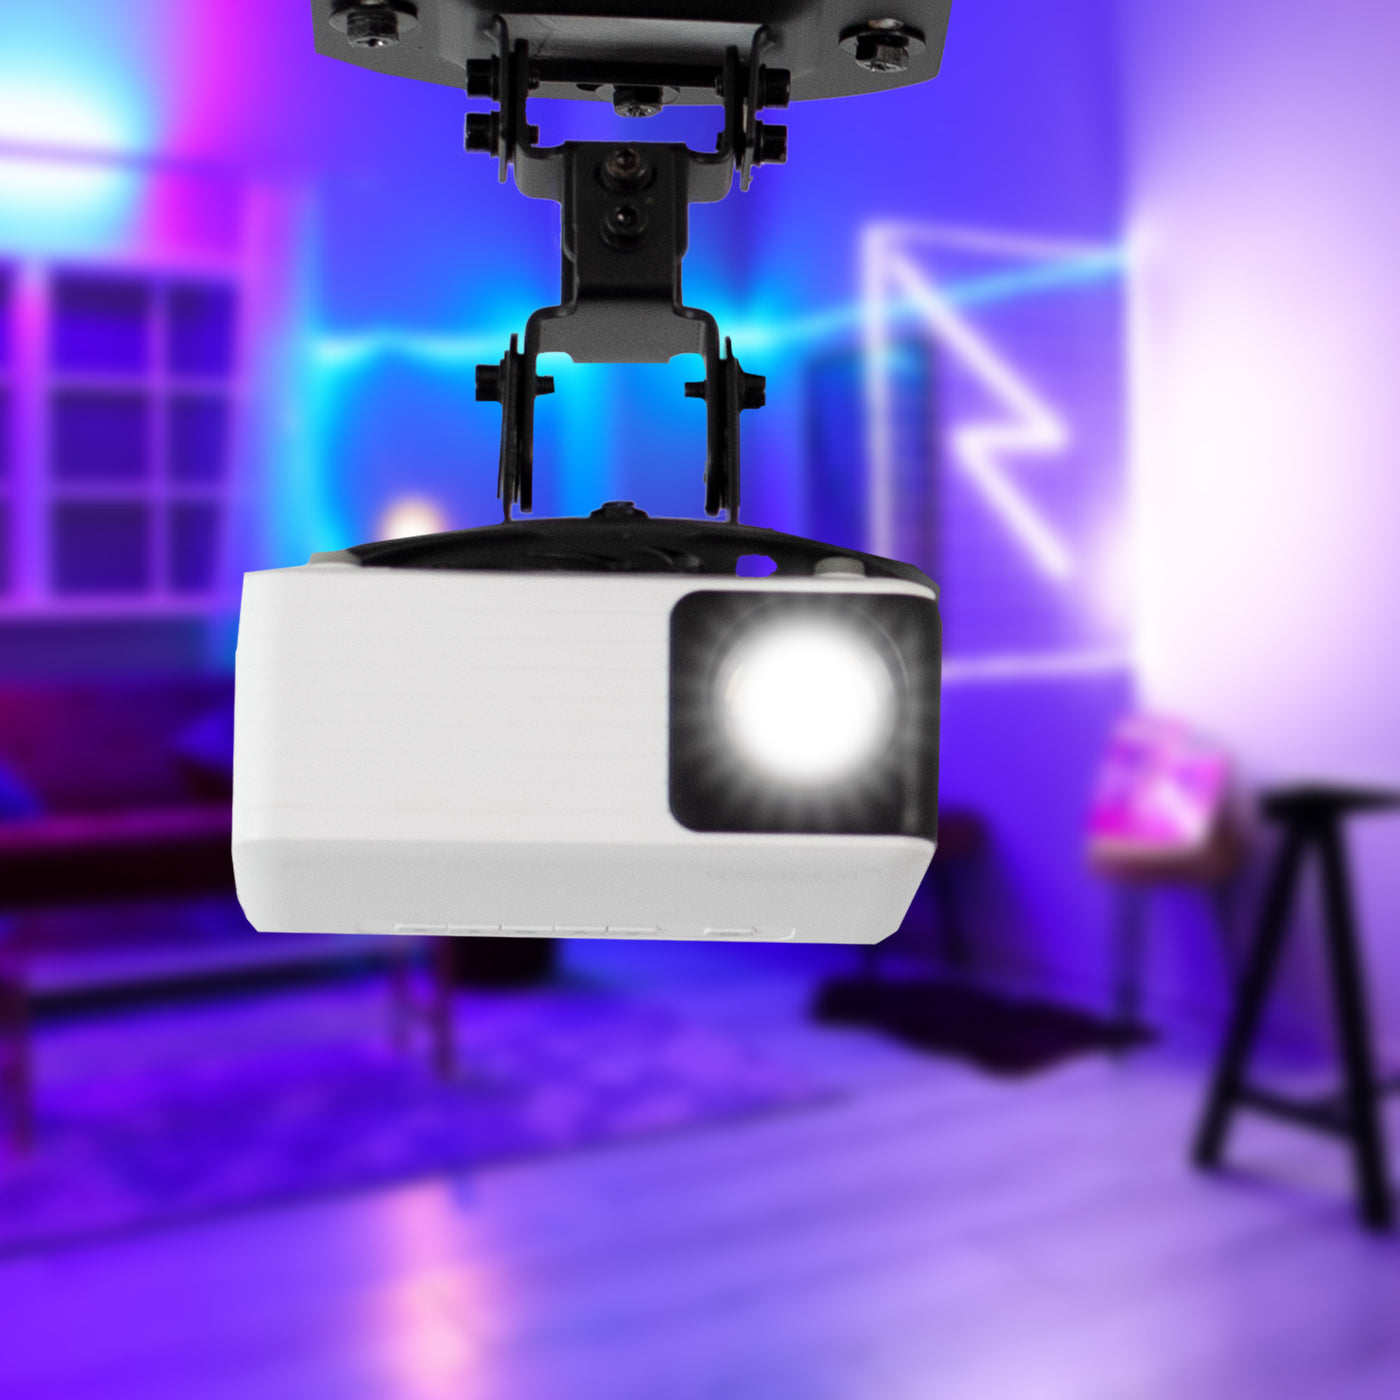 Modern studio with a ceiling projector mount.